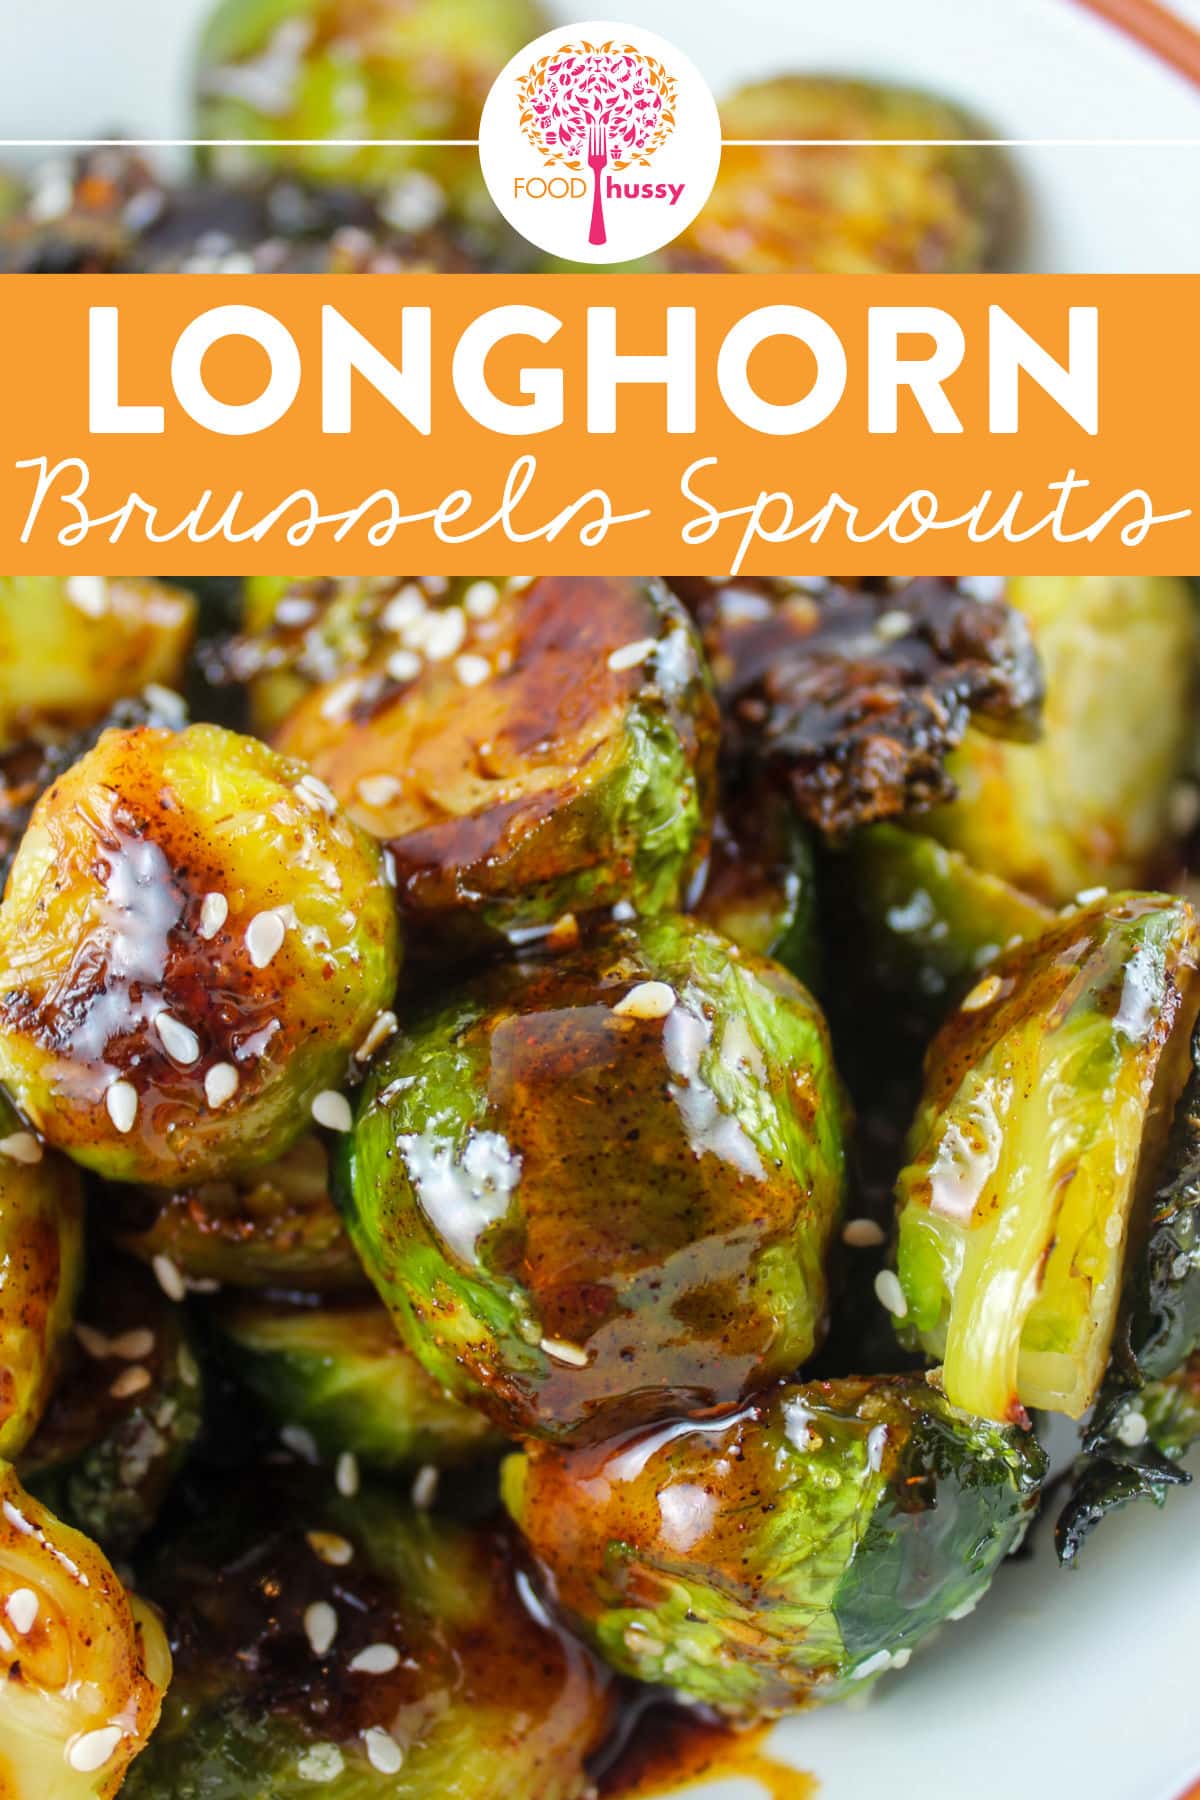 Longhorn Steakhouse has the most amazing Spicy Crispy Brussels Sprouts and I’m going to share with you an amazing copycat recipe that makes them EVEN BETTER at home!

These are the best Brussels sprouts! They are so crispy and then they’re tossed in sweet & spicy sauce you’re going to want to pour on everything! via @foodhussy